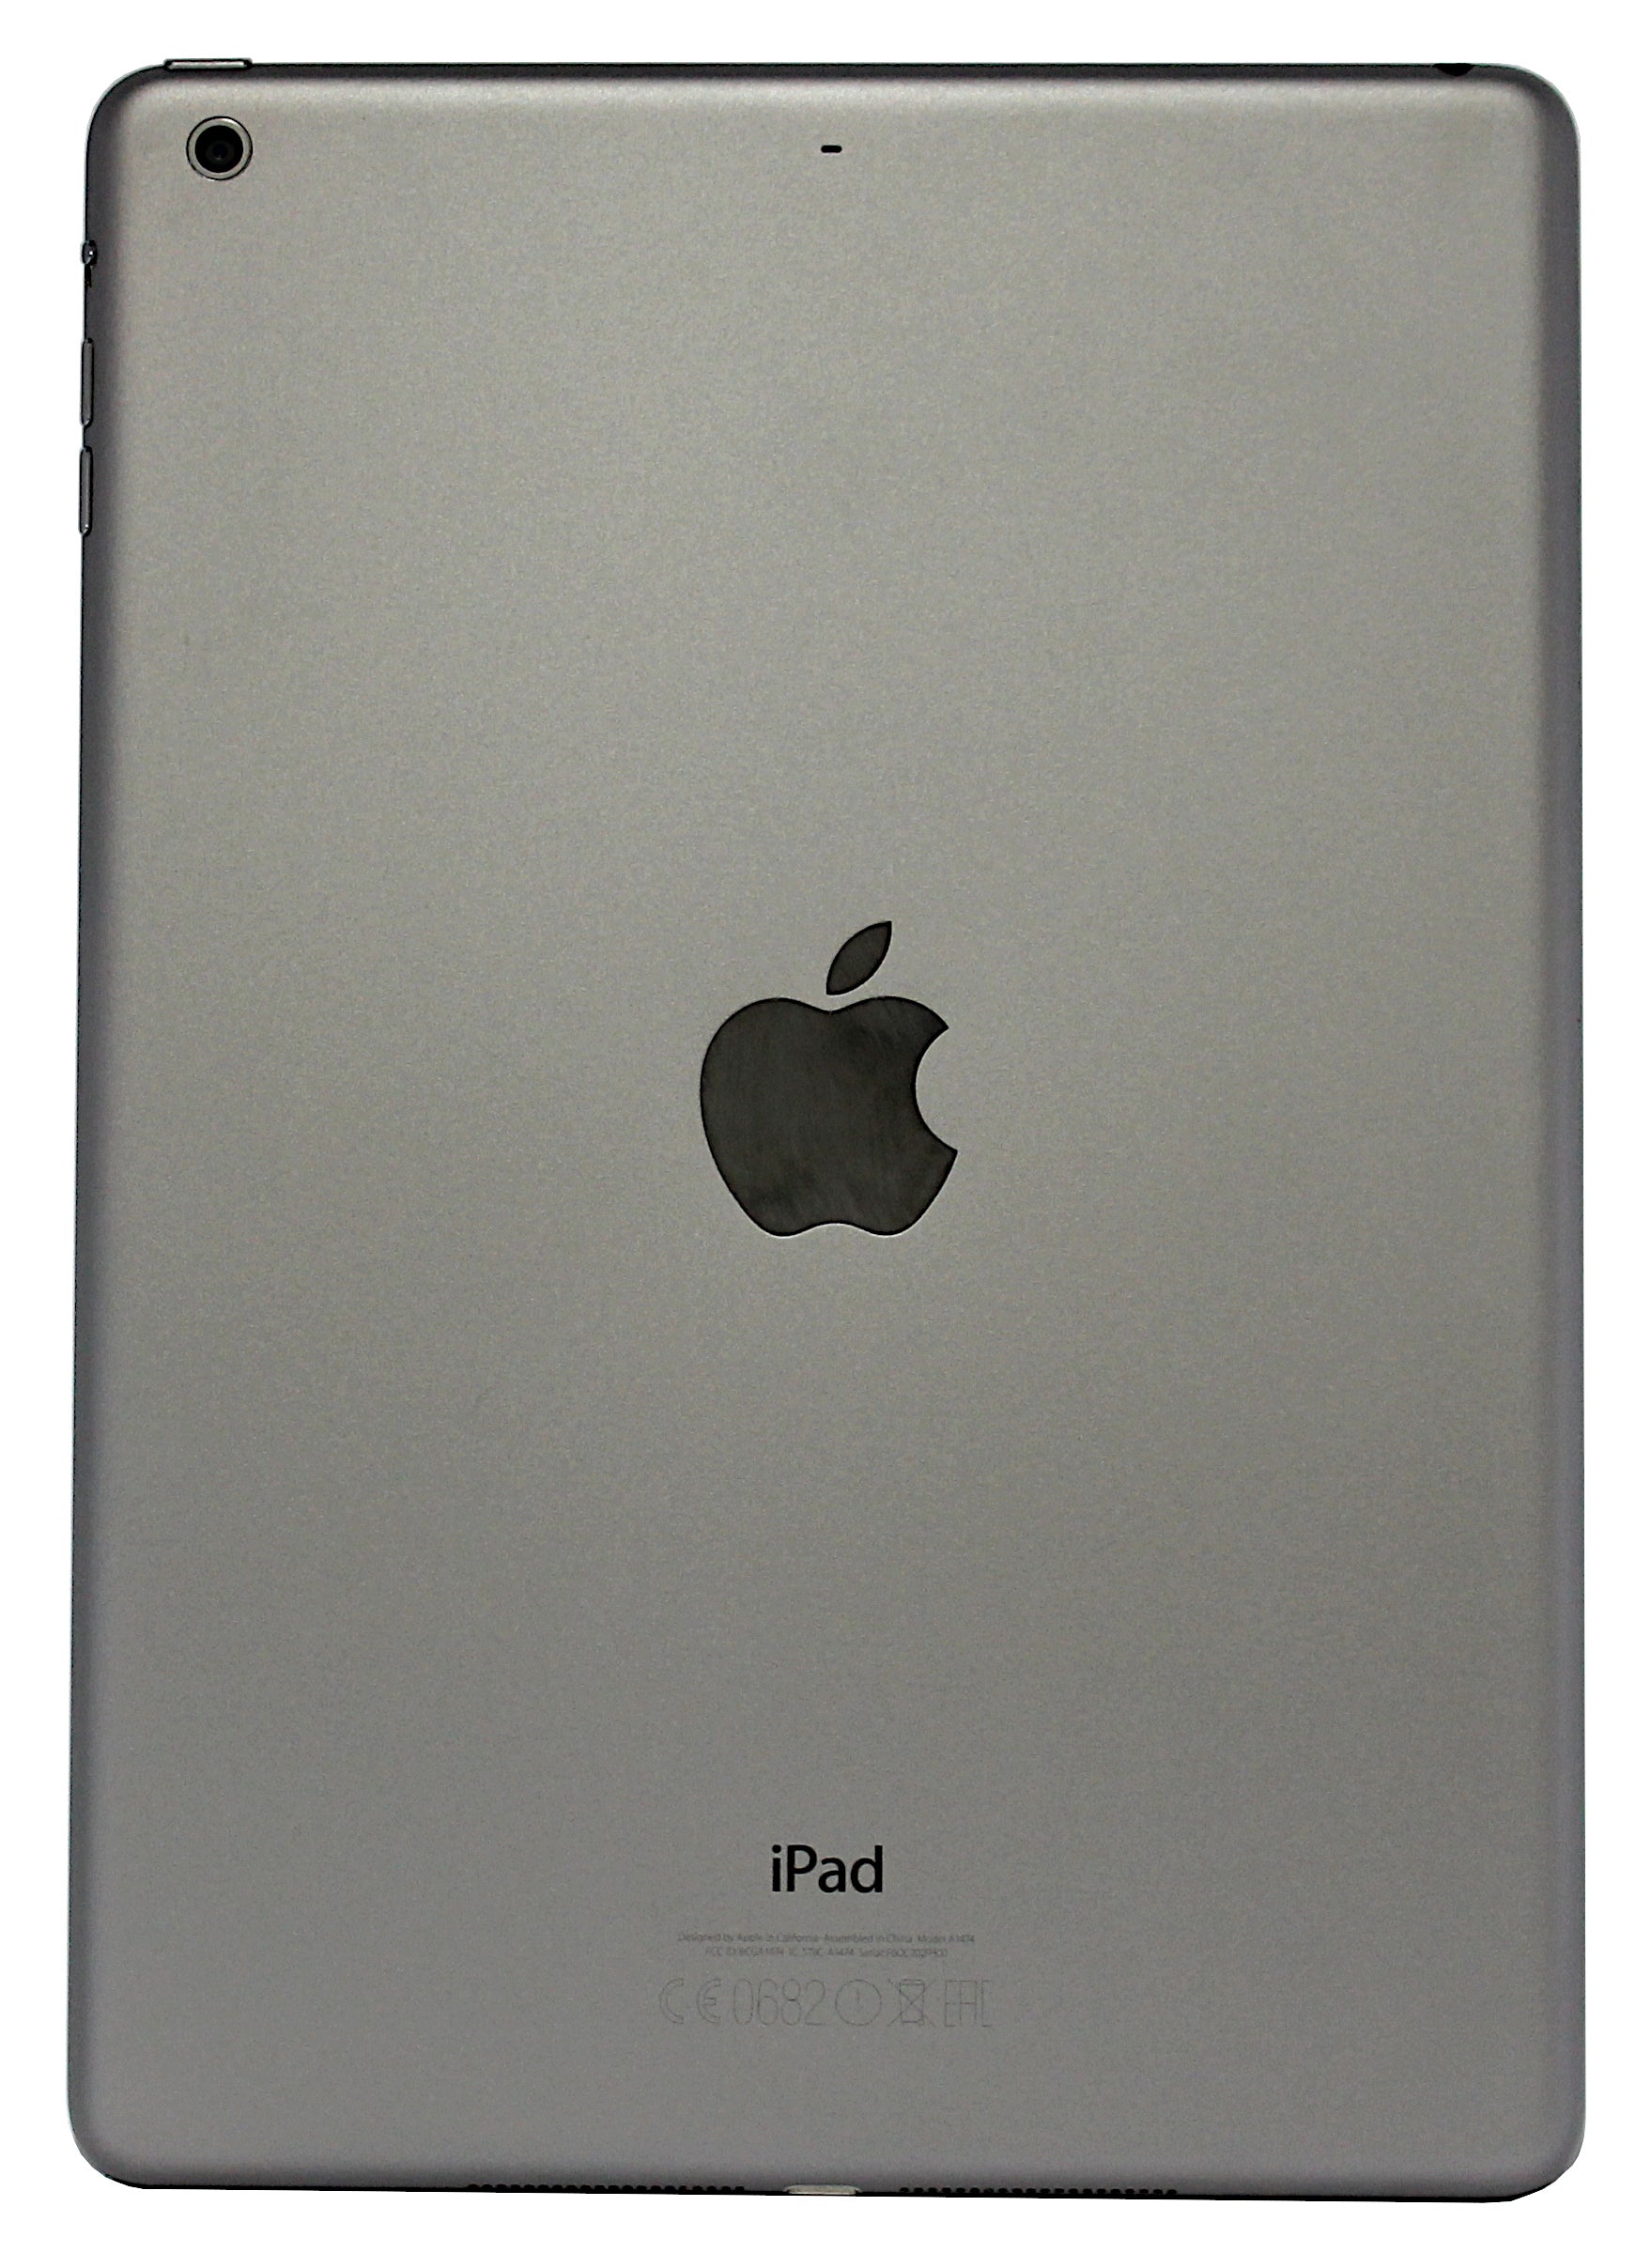 Apple iPad Air 1st Generation Tablet, 32GB, WiFi, Space Grey, A1474